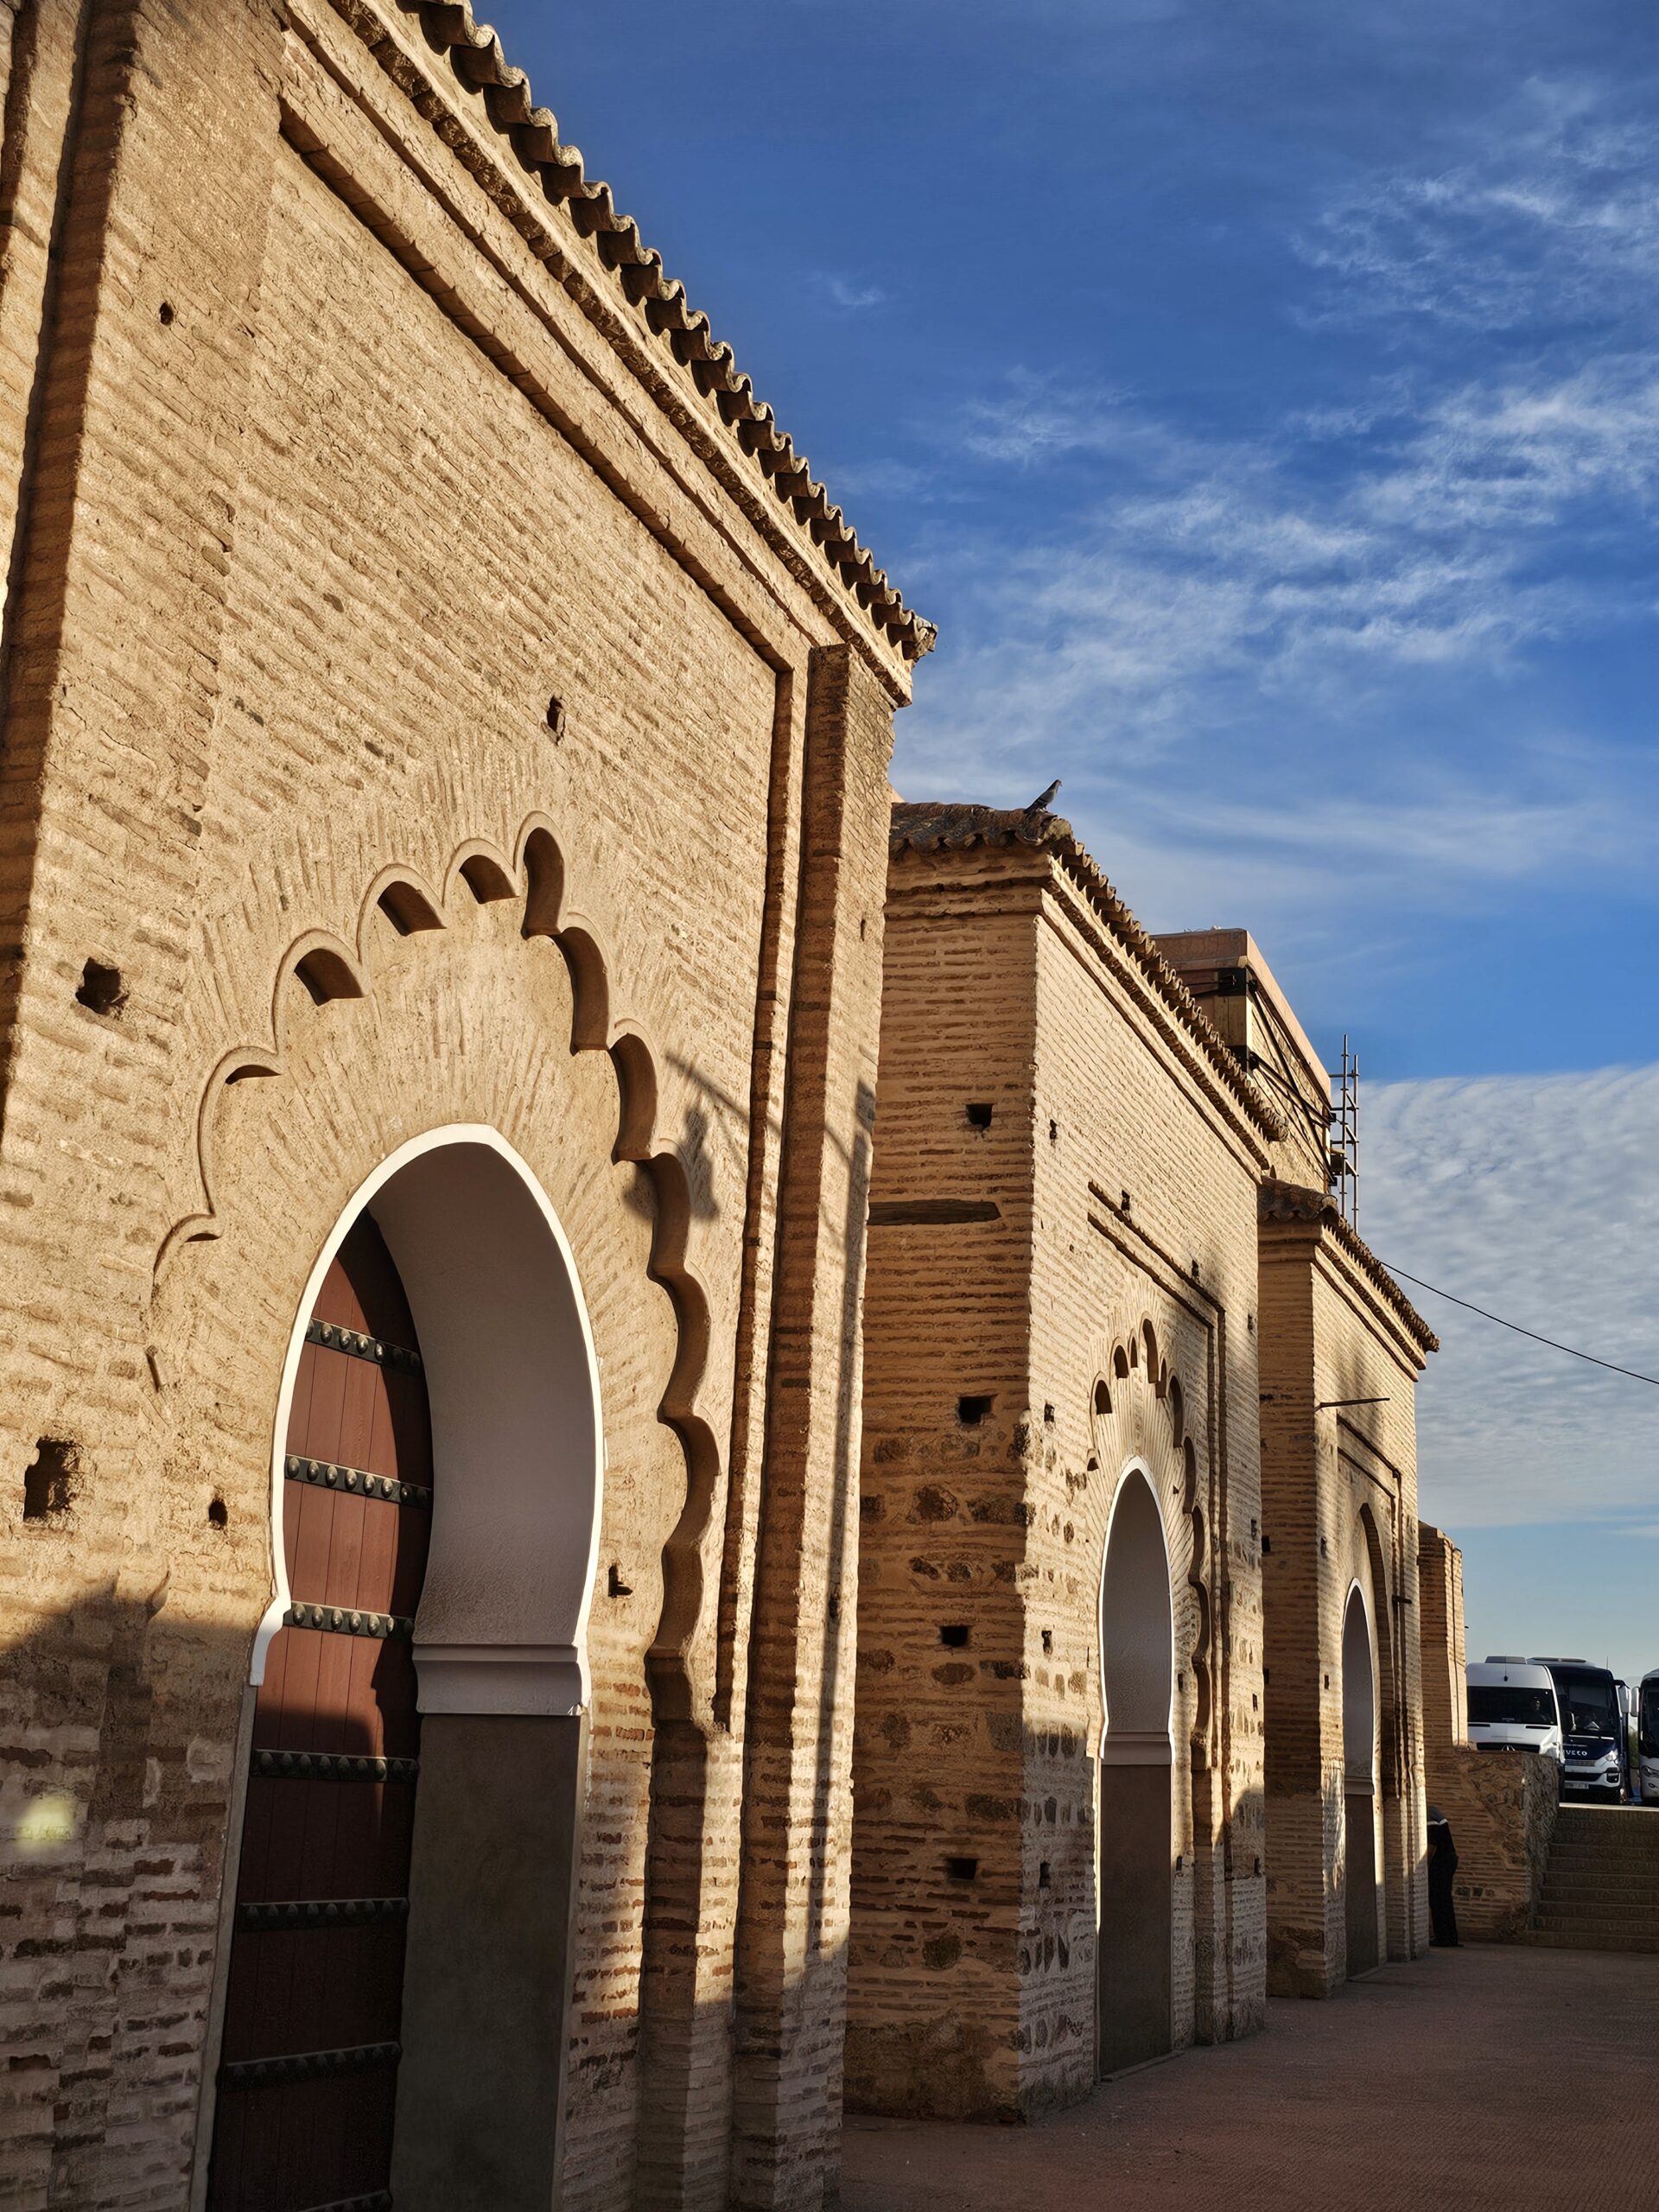 Side wall of Koutoubia Mosque with ornate islamic style porticos and doors. Image by 360onhistory.com